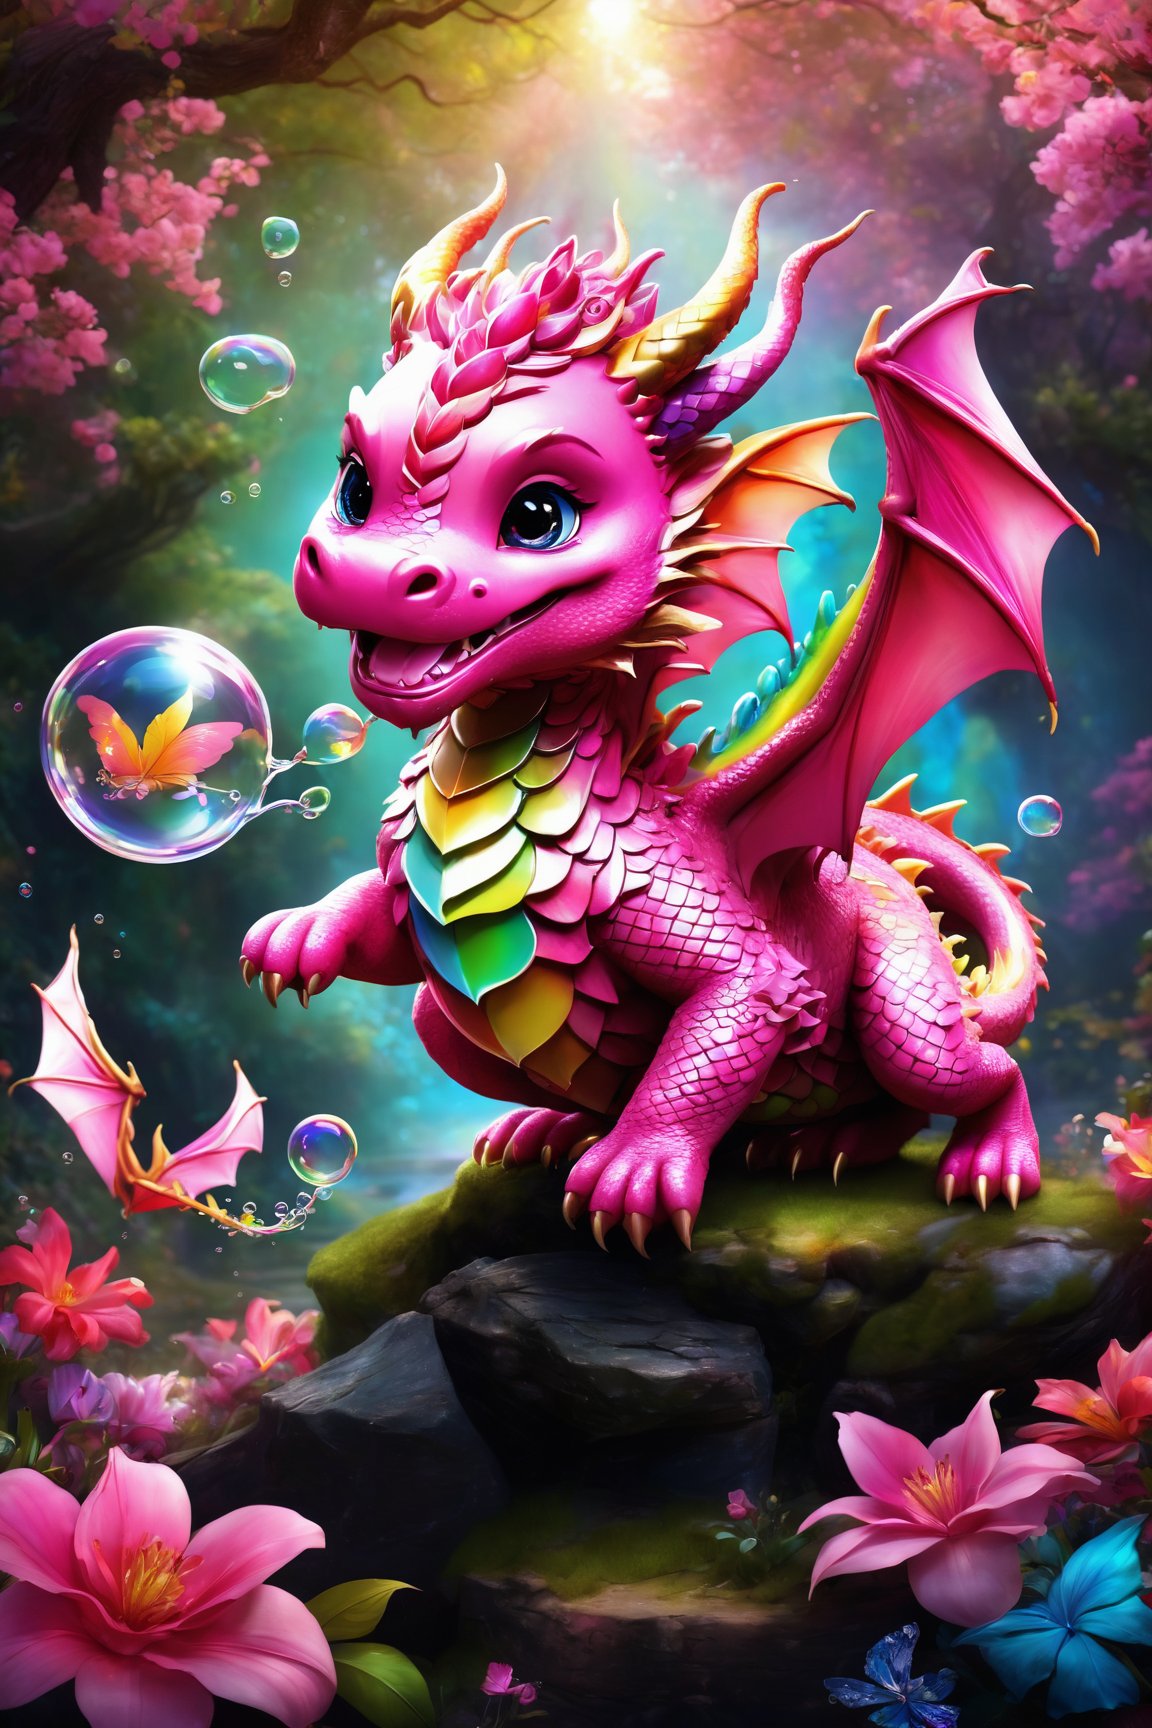 (highres:1.2),pink dragon,funny face,whimsical,playful,expressive eyes,witty smile,detailed scales,vibrant colors,magical creature,cheeky expressions,with wings,curly horns,sparkling eyes,dancing flames,floating in the air,absurdly cute,pink fantasy land,floating clouds,rainbow in the background,colorful flowers and trees,lighthearted and joyful,dragon blowing bubbles,childlike innocence,laughter and joy,evoking happiness and wonder.